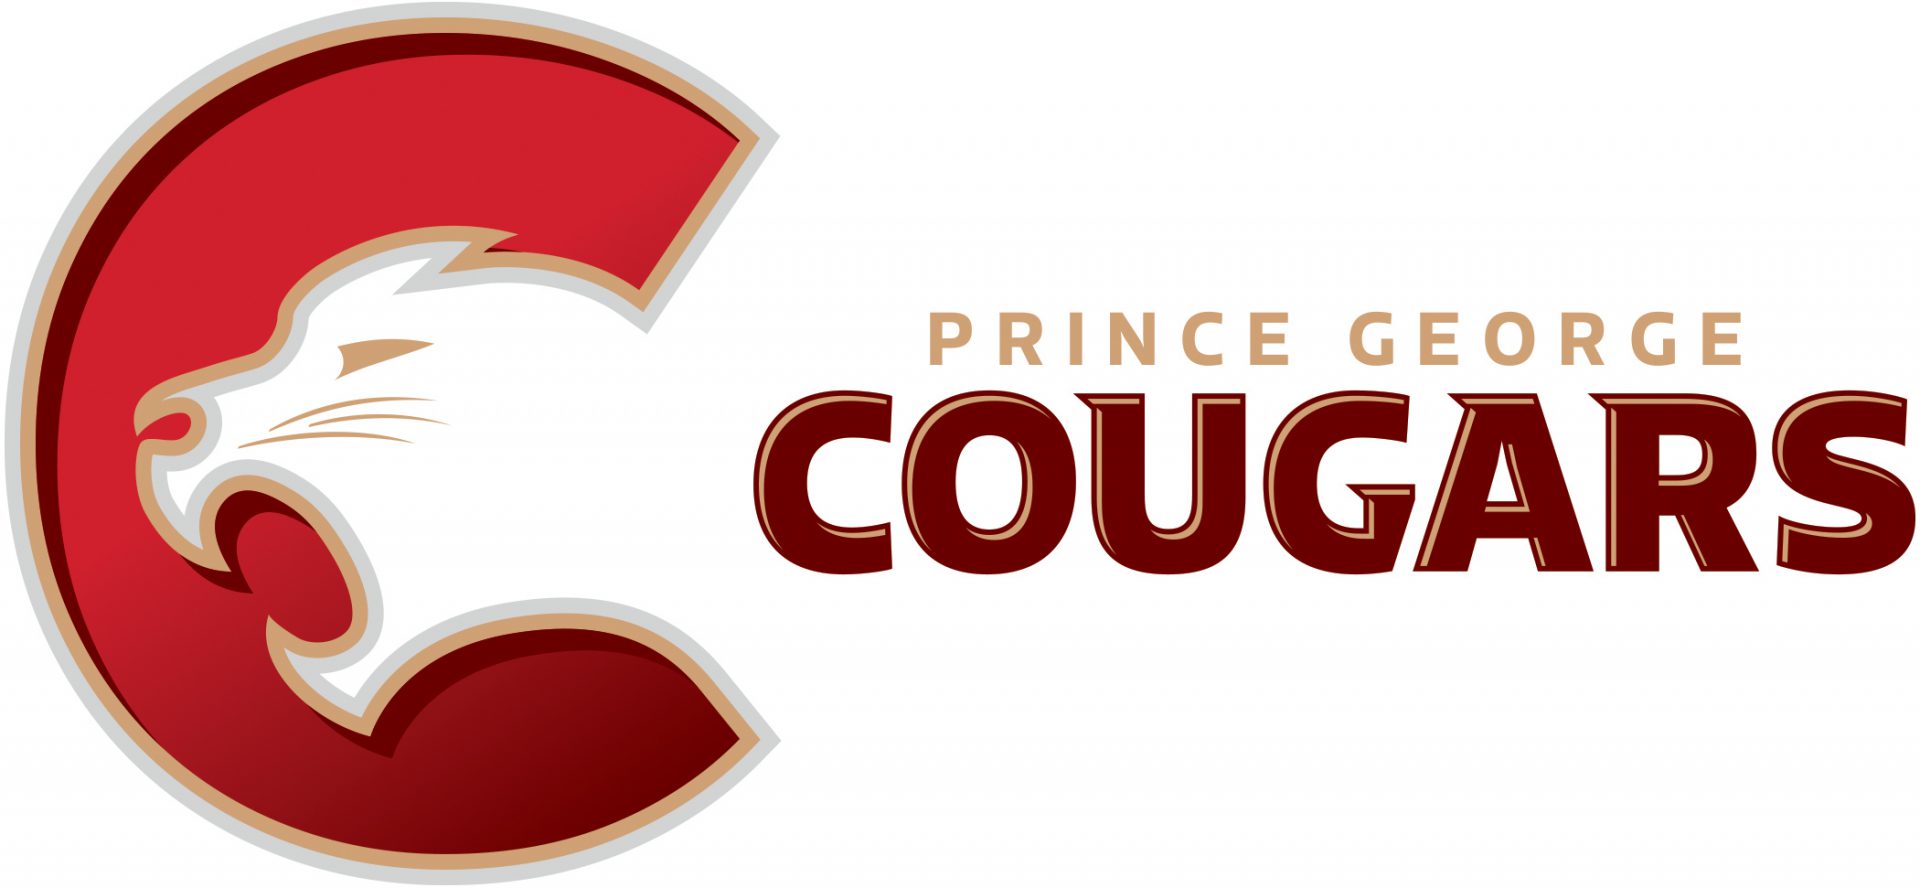 Another season on the horizon for the Prince George Cougars